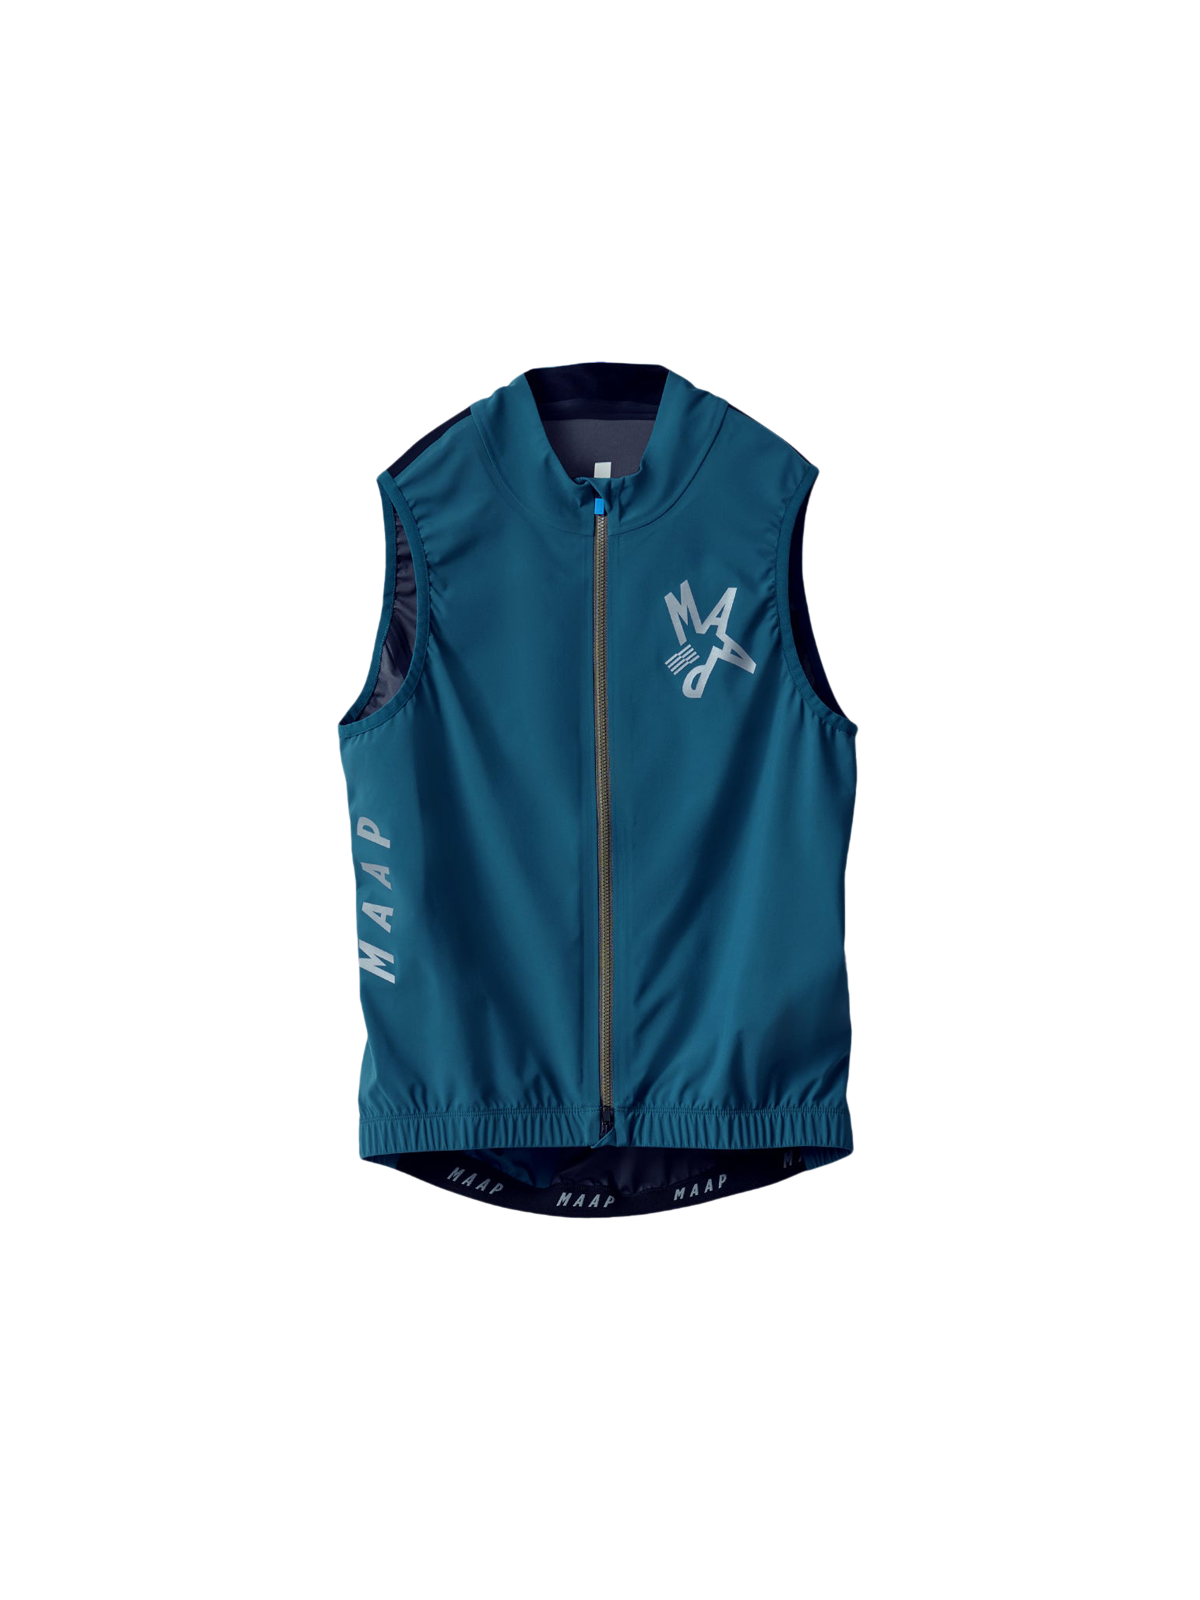 Women's Prime OffCuts Vest - MAAP Cycling Apparel